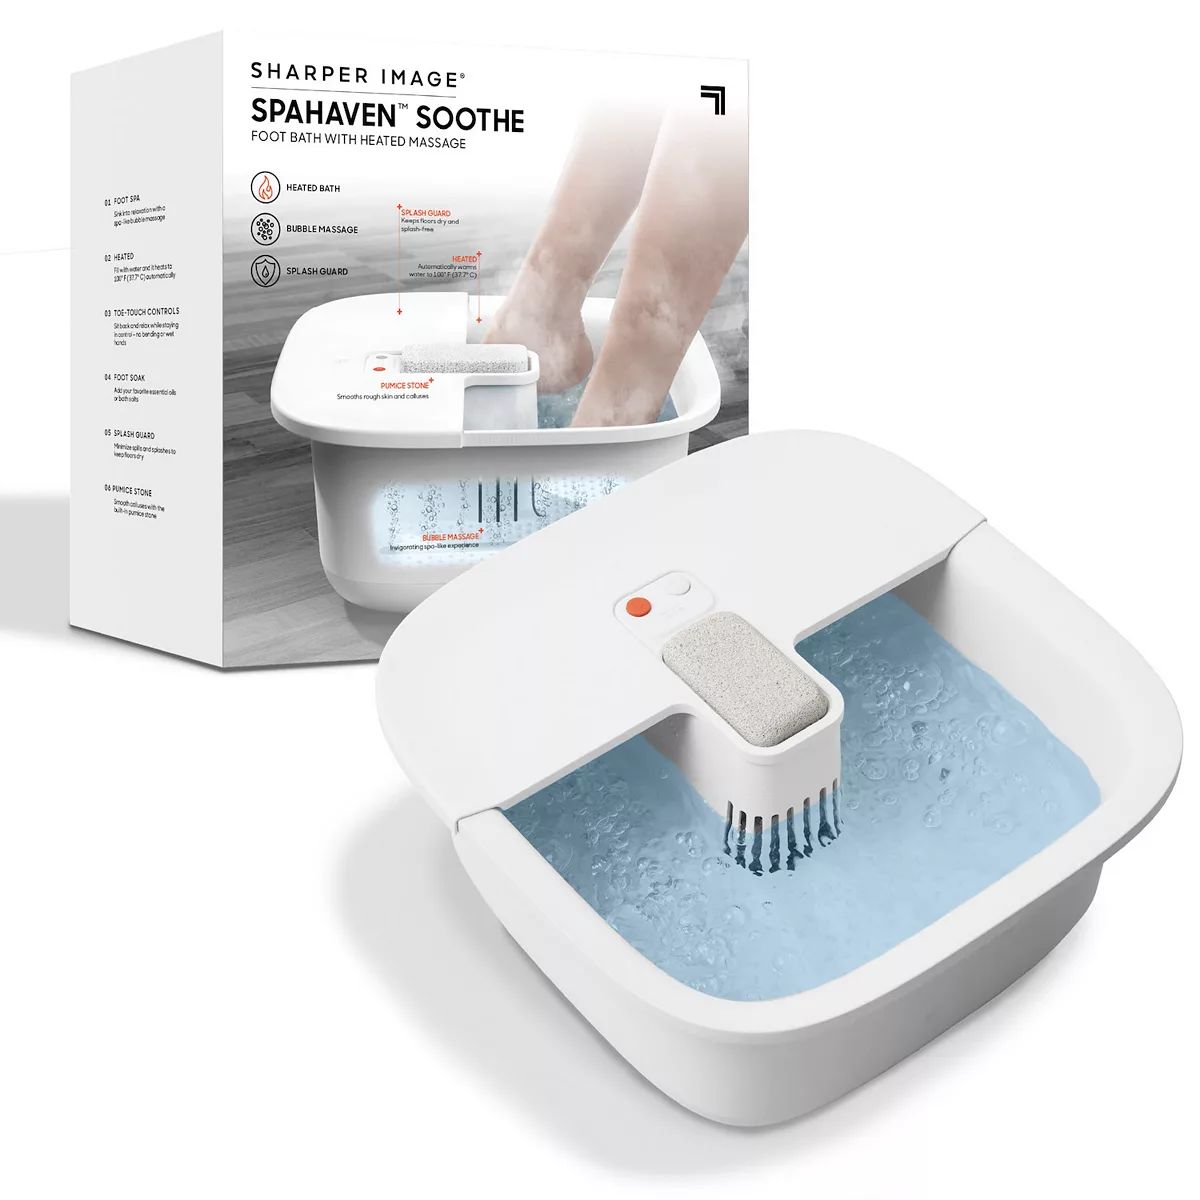 Sharper Image Spahaven Soothe Foot Bath with Heated Massage | Kohl's